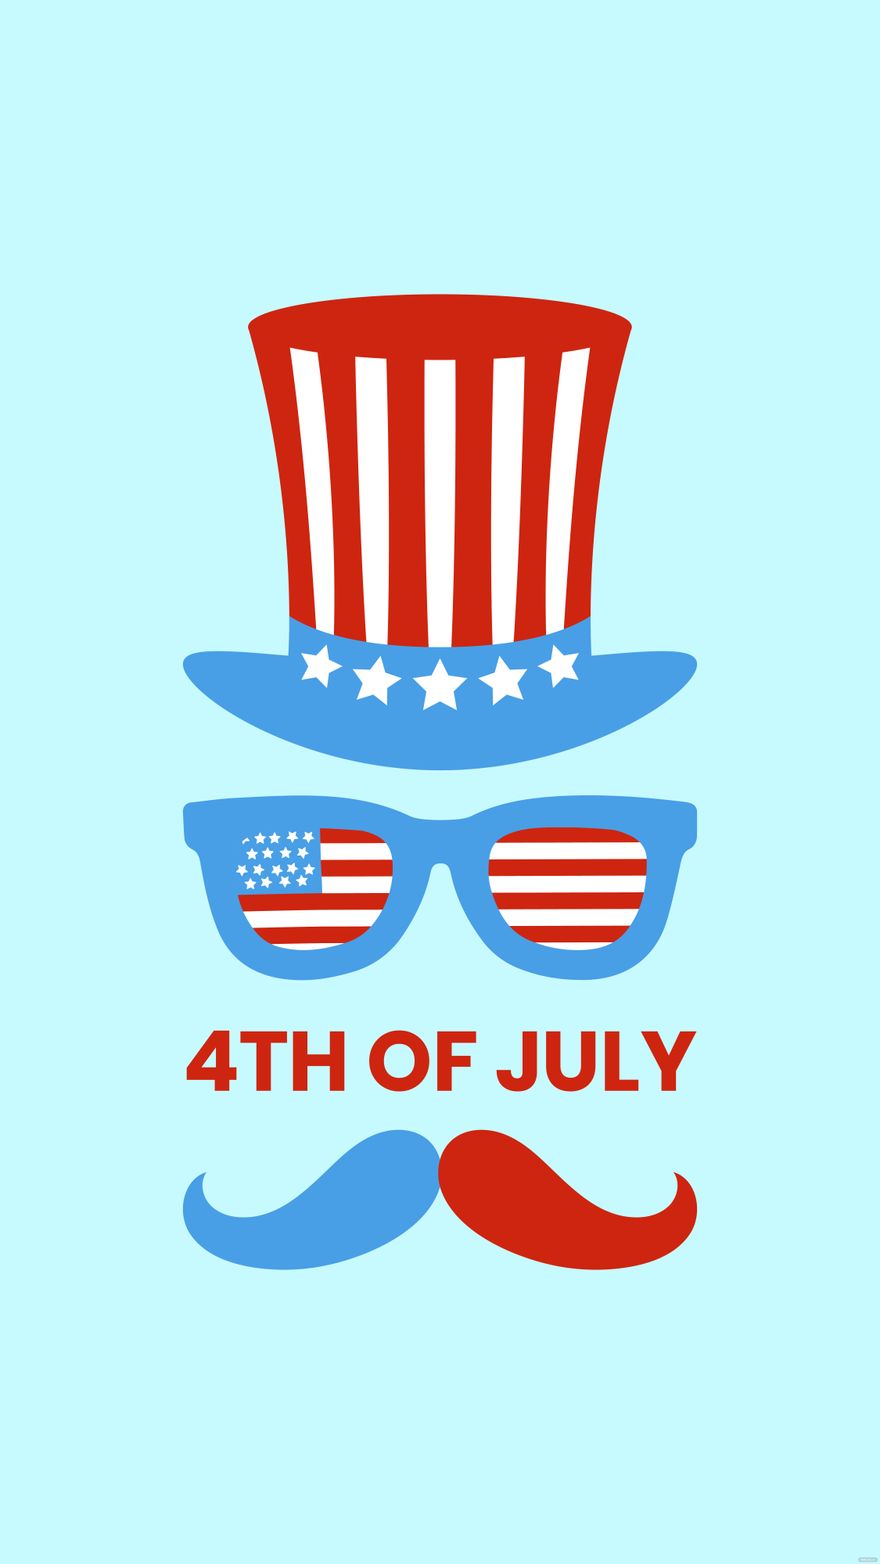 Free 4th Of July Iphone Background in Illustrator, EPS, SVG, JPG, PNG